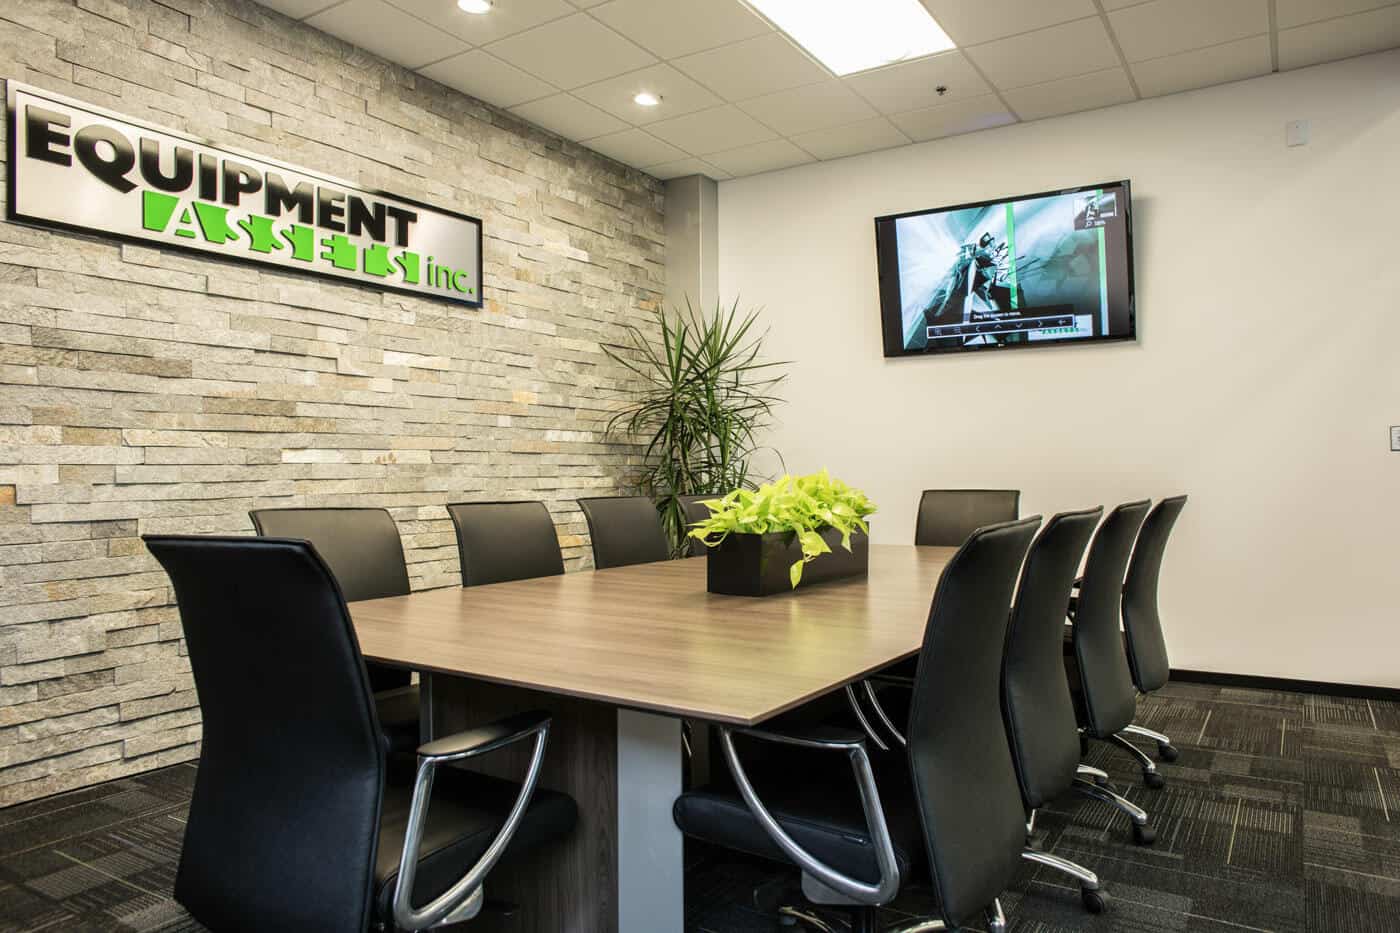 Modern office meeting room featuring a long wooden table, black chairs, a wall-mounted tv displaying graphics, and the company's name "equipment assets inc." on a stone wall with green plants.